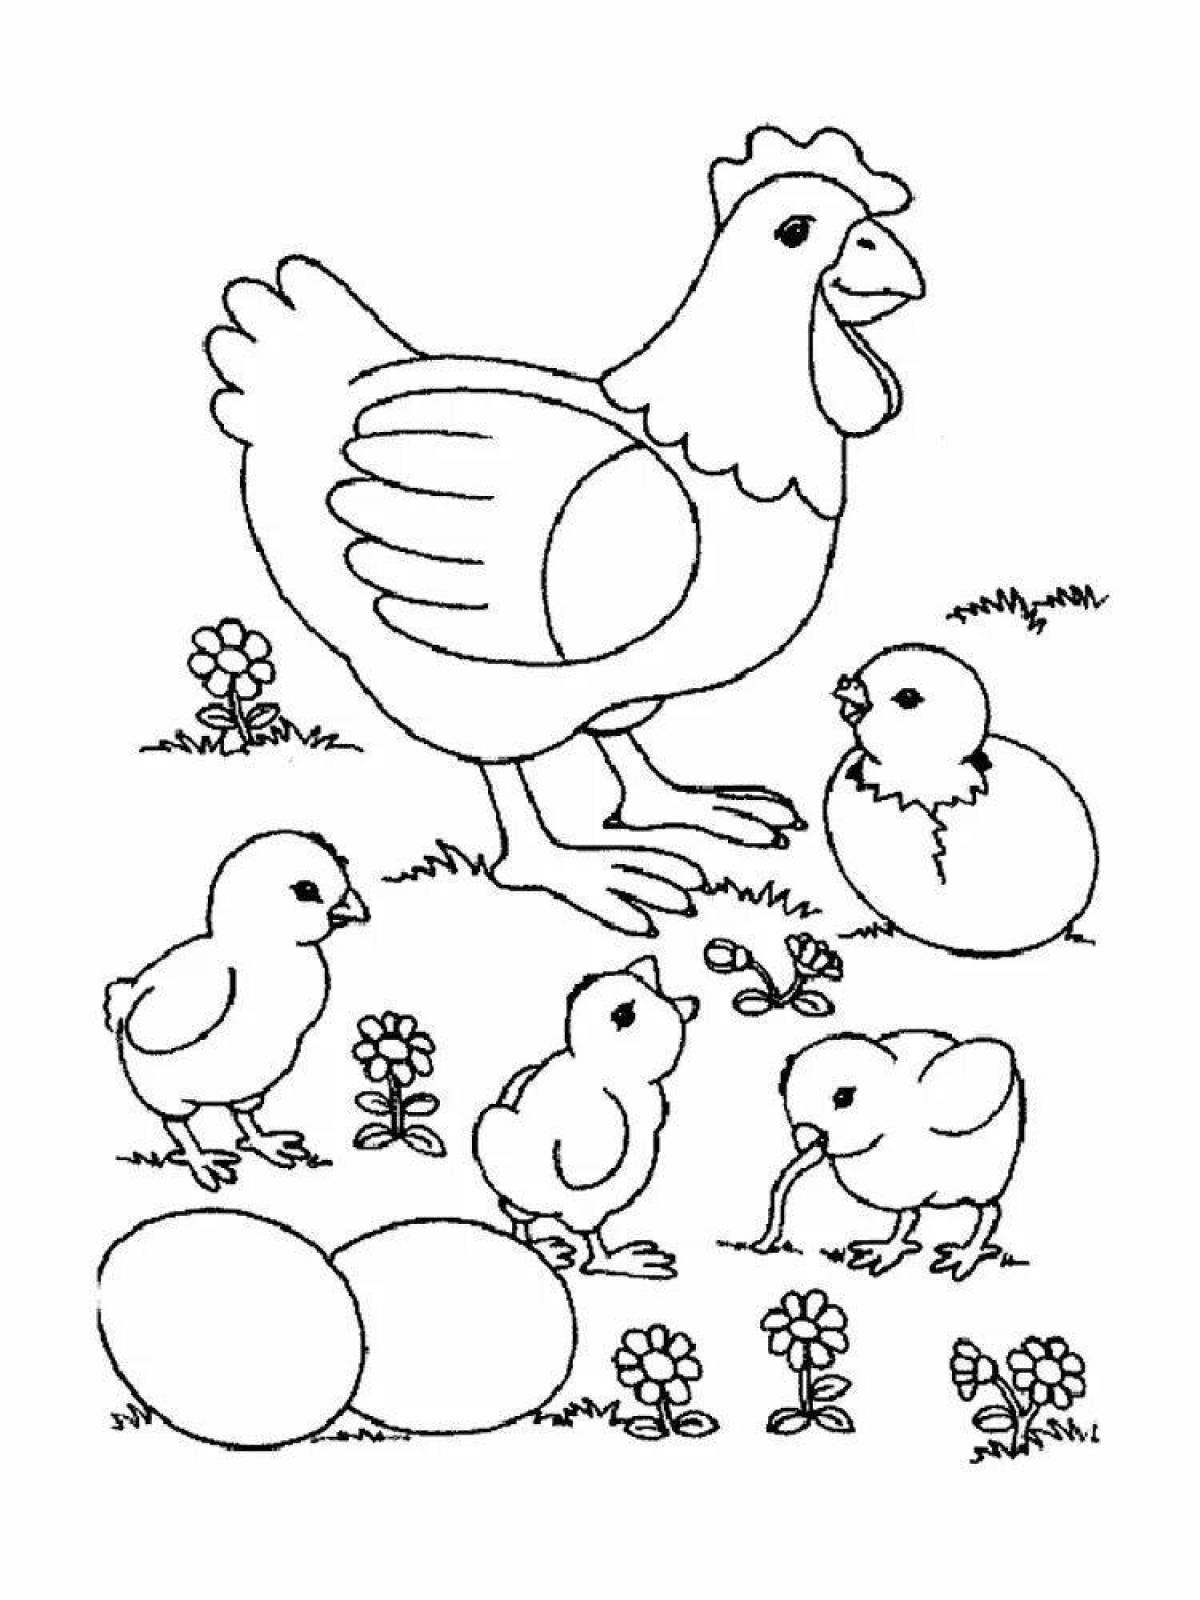 Coloring page sweet chicks